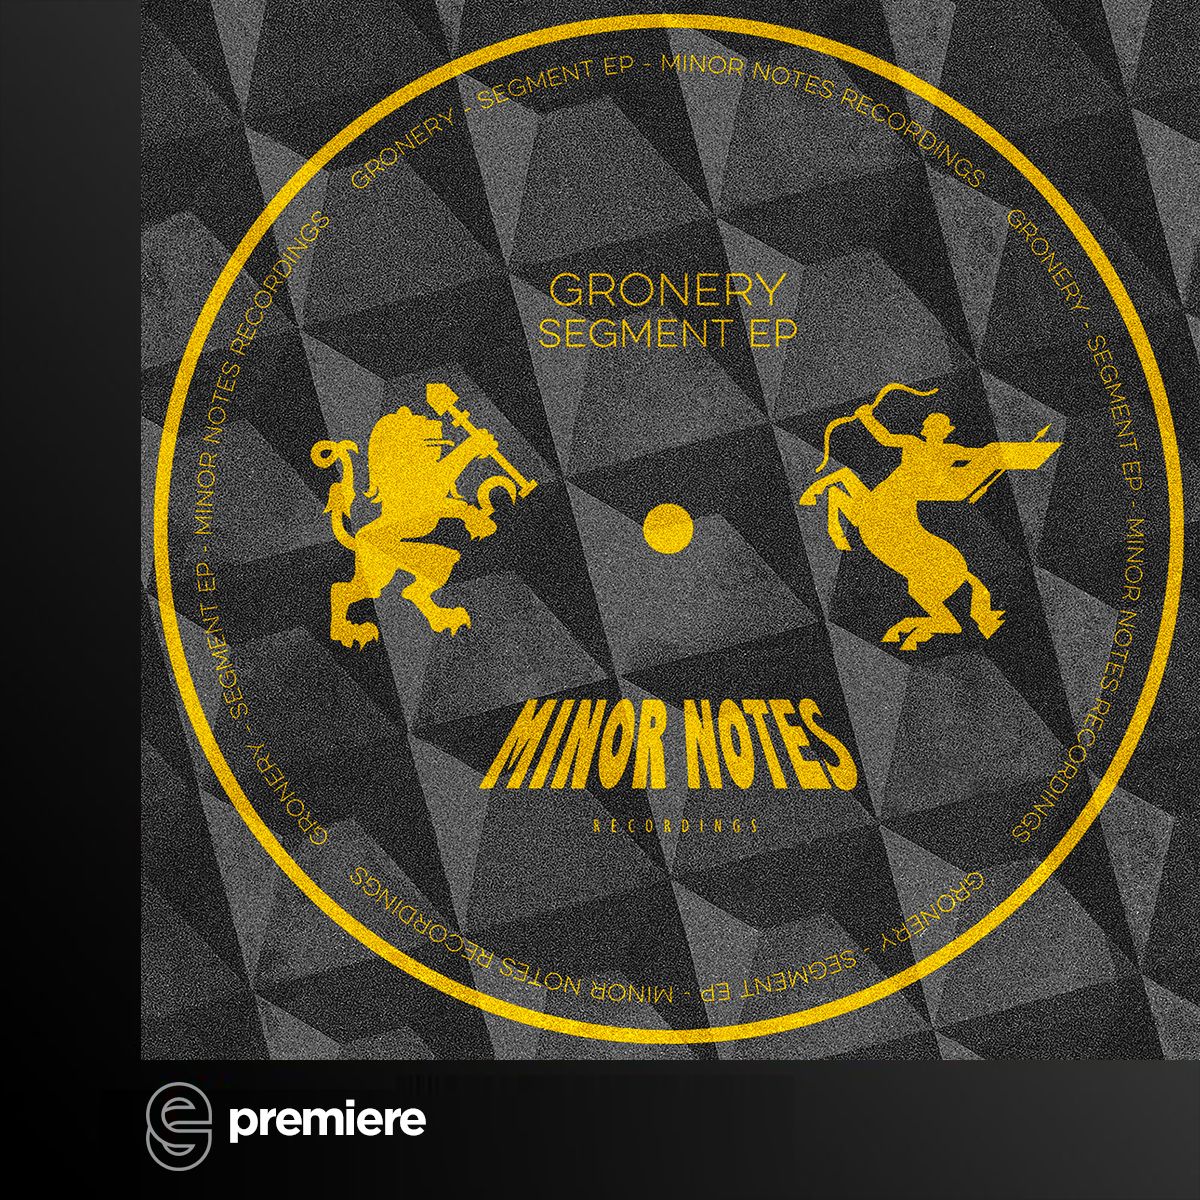 Hent Premiere: Gronery - Bouncing On Ya - Minor Notes Recordings